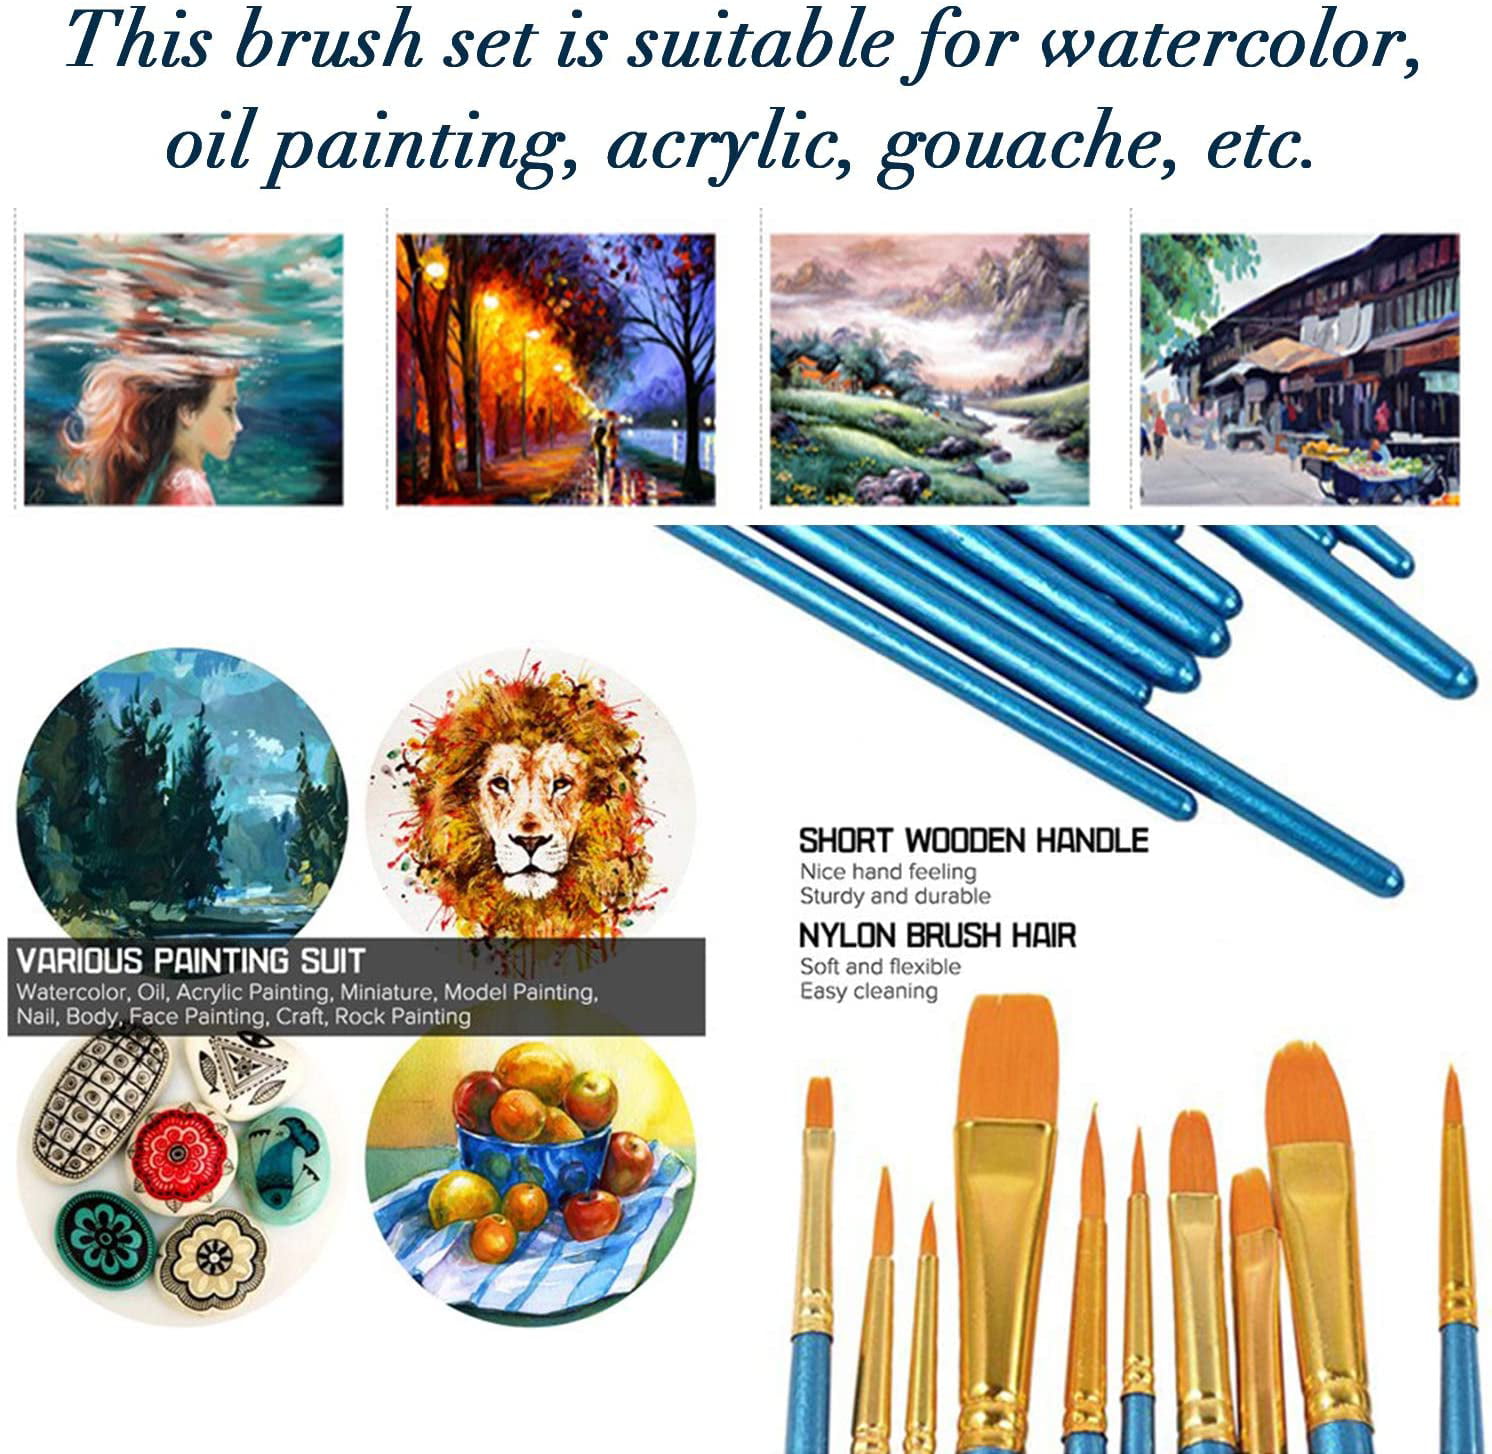 Soft Art Paint Brushes Set Perfect for Acrylic Watercolor Rock Painting ATORX 10 Pcs Paintbrushes High-grade Nylon Hair Brushes Easy to Clean and Use